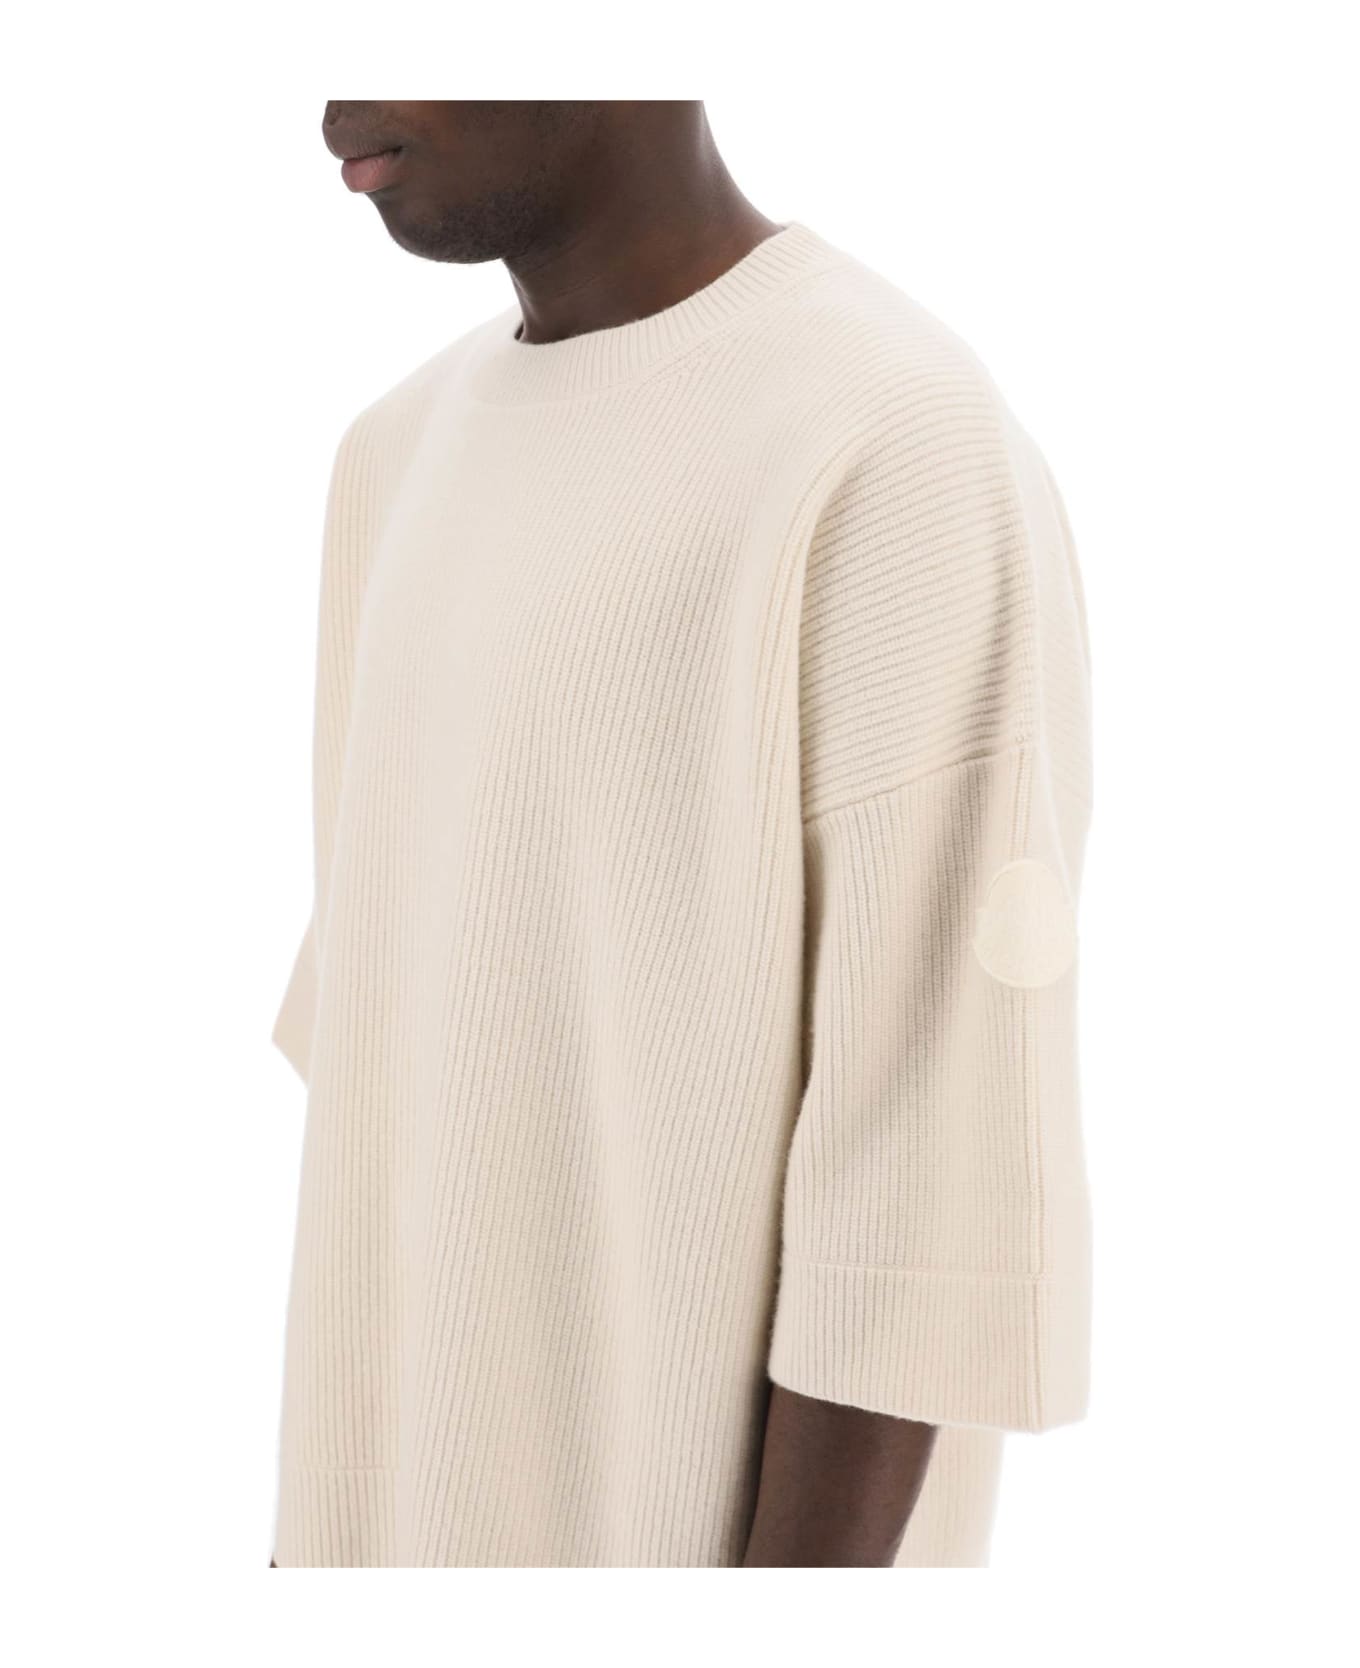 Moncler Genius Moncler X Roc Nation Designed By Jay-z - Virgin Wool Crew-neck Sweater - White